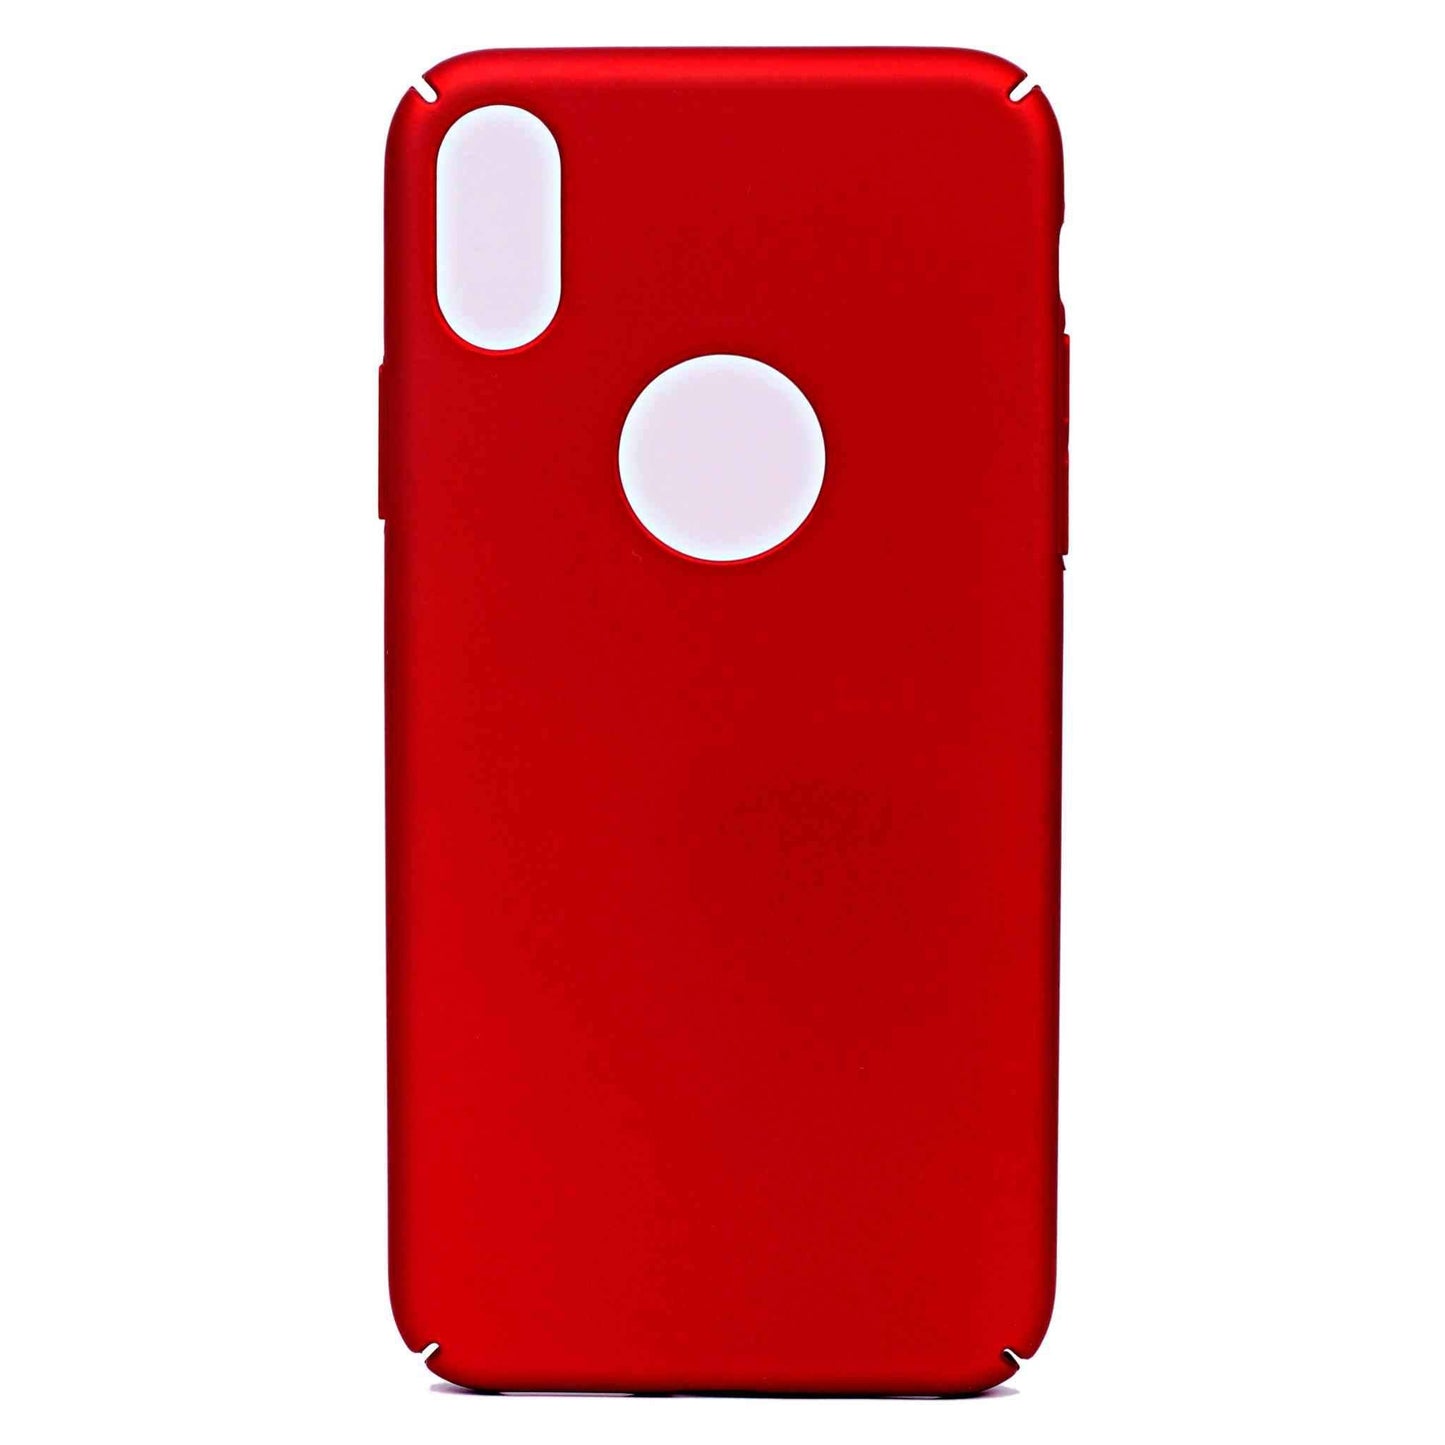 Indian Petals Shock-proof Anti-scratch Hard Protective Mobile Back Case Cover for Apple iPhone X, Hot Red - Indian Petals